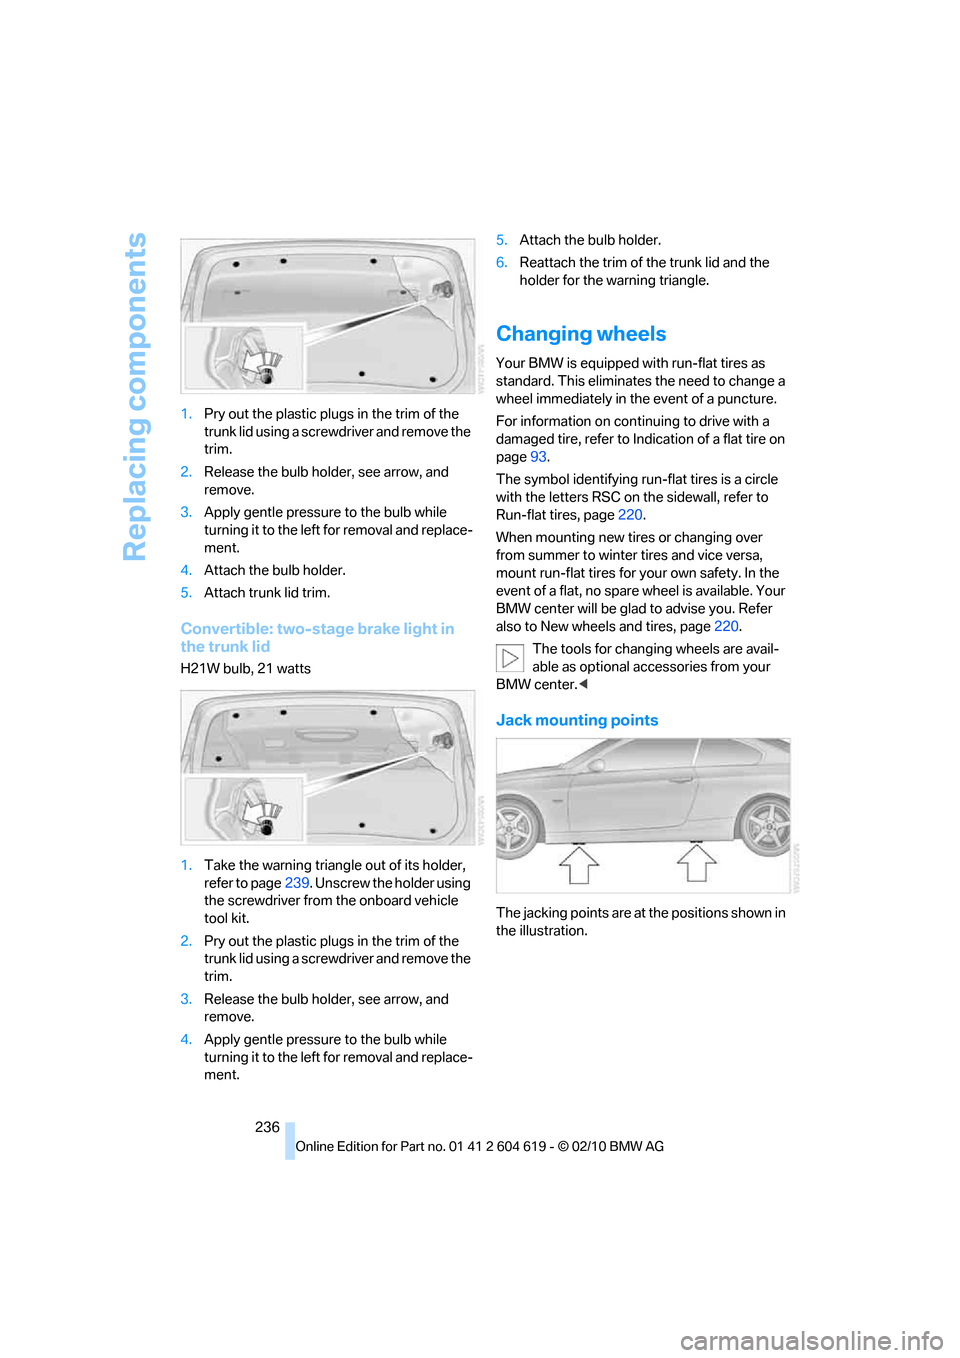 BMW 335I CONVERTIBLE 2011 E94 Owners Manual Replacing components
236 1.Pry out the plastic plugs in the trim of the 
trunk lid using a screwdriver and remove the 
trim.
2.Release the bulb holder, see arrow, and 
remove.
3.Apply gentle pressure 